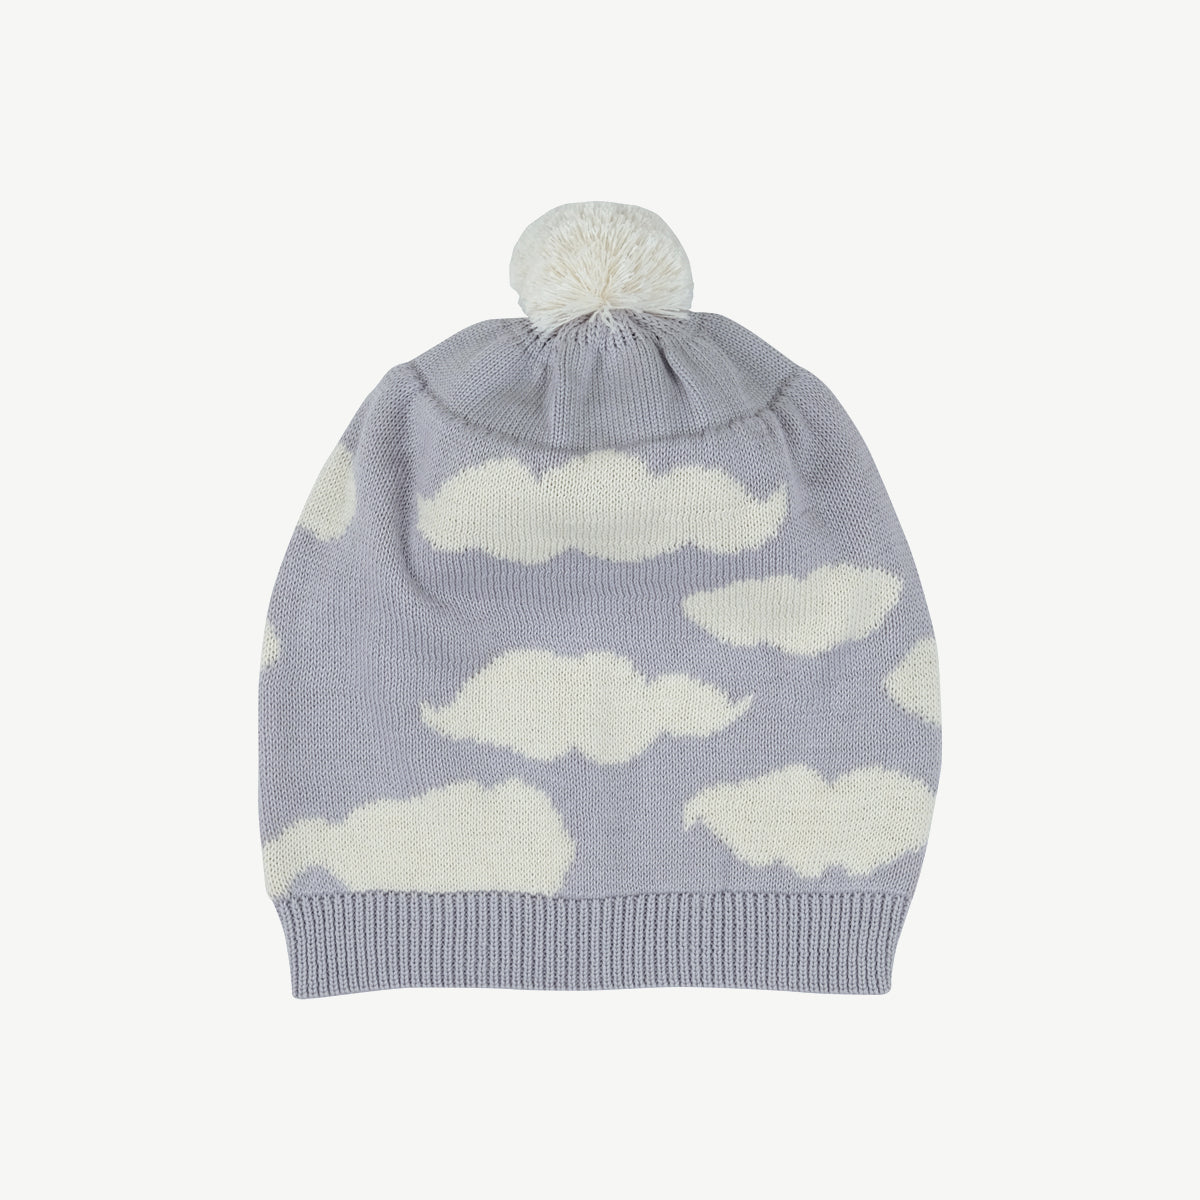 'clouds' gray knit clouds baby beanie